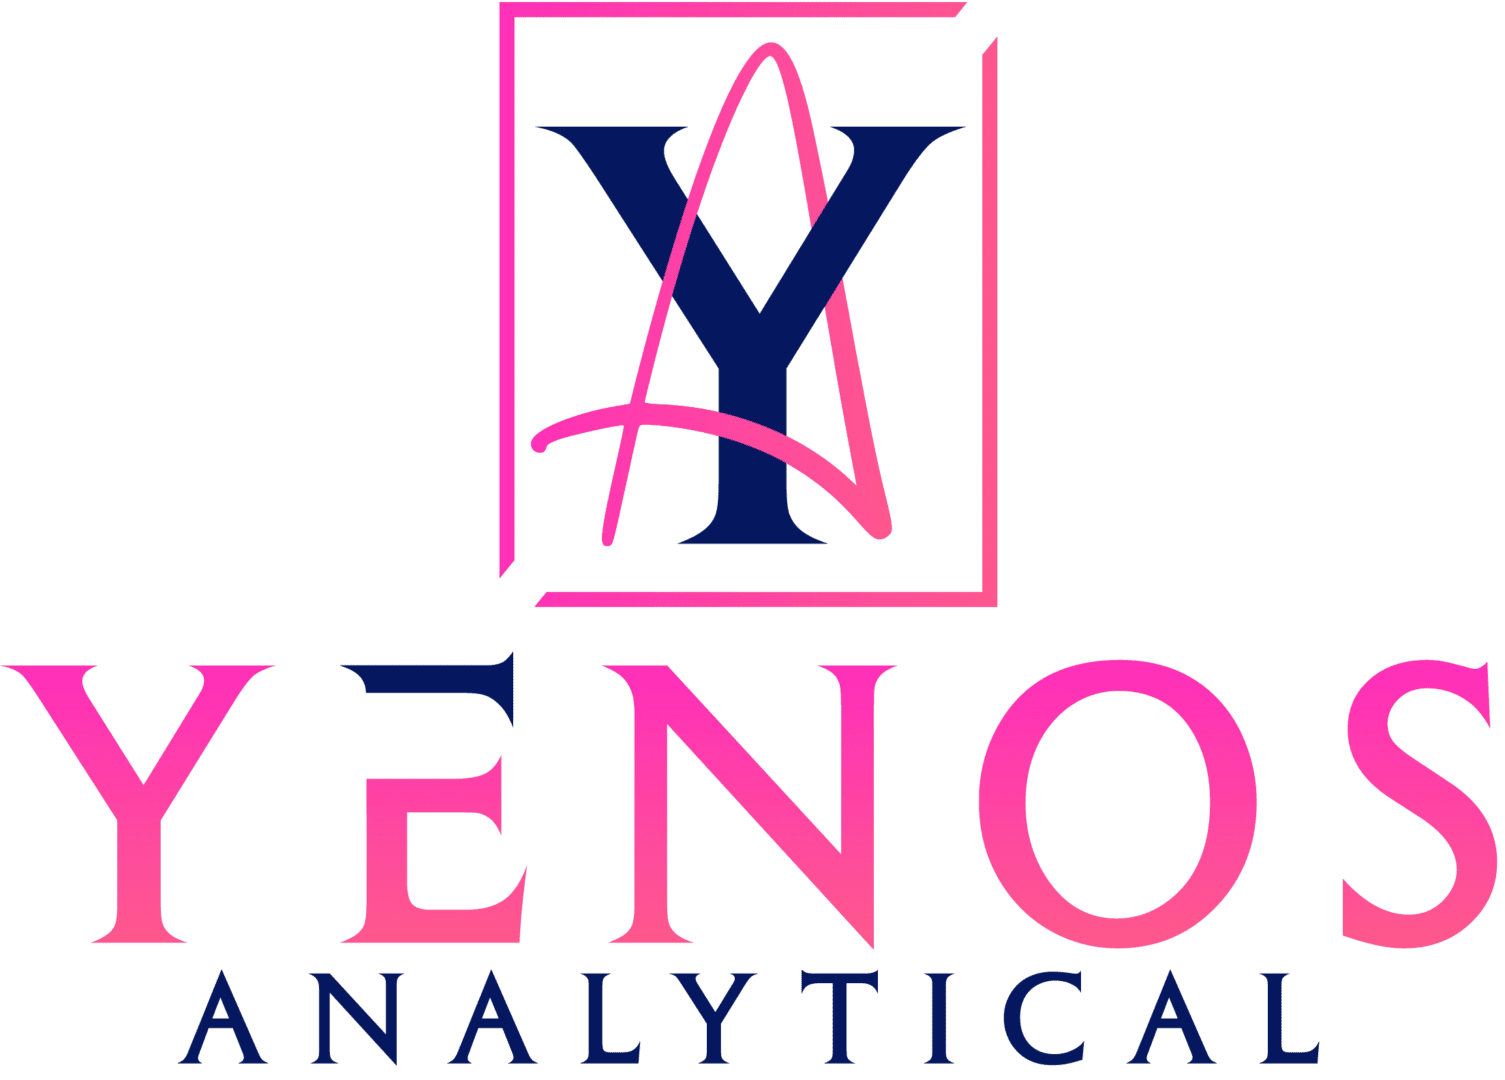 A logo of venon analytical is shown.